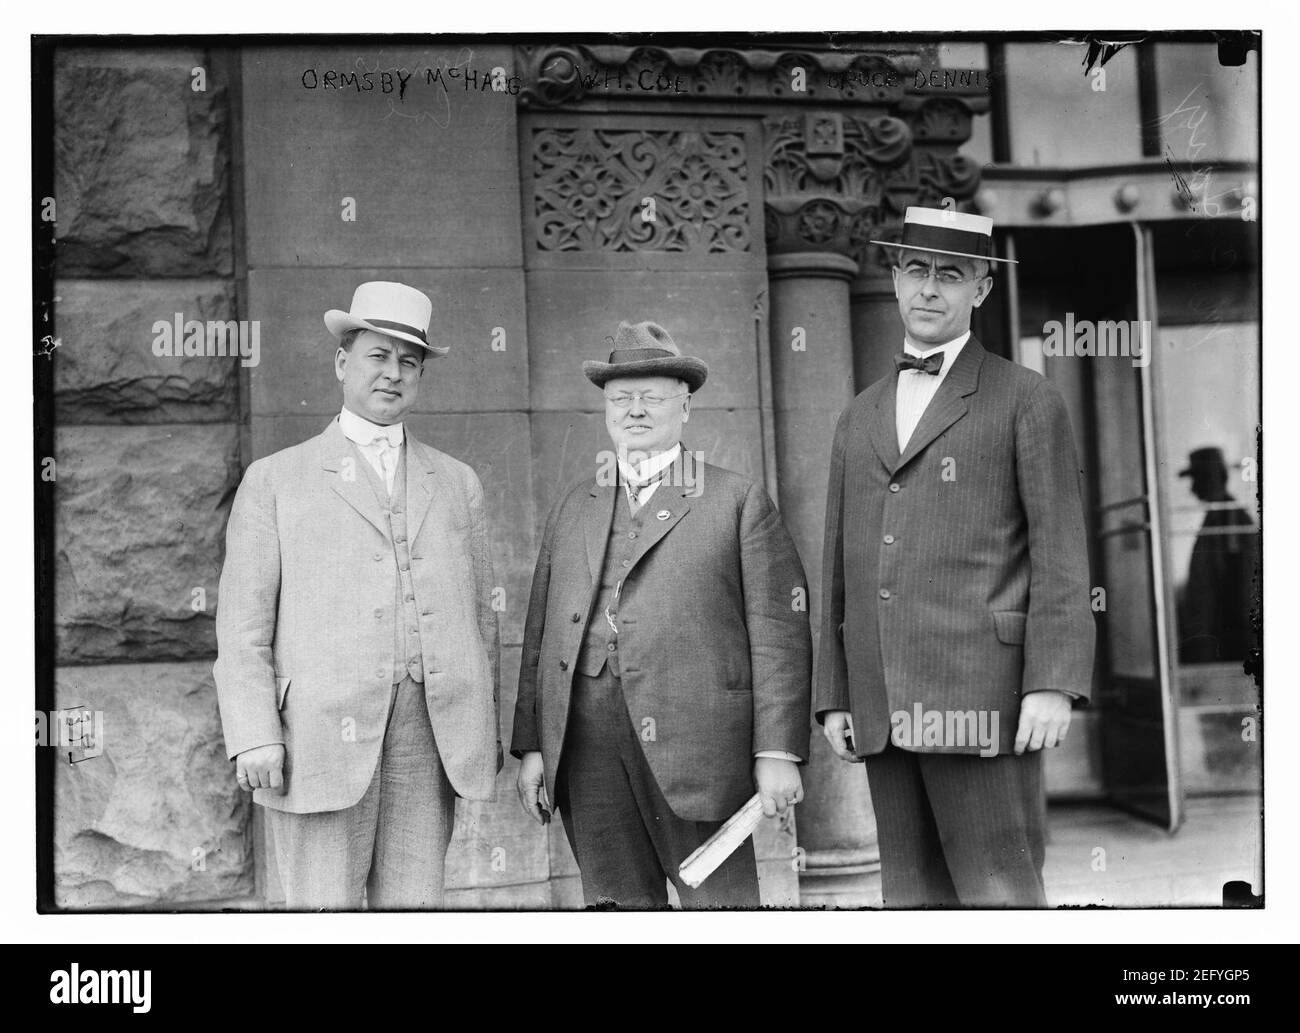 Ormsby McHarg, W.H. Coe, Bruce Dennis Stockfoto